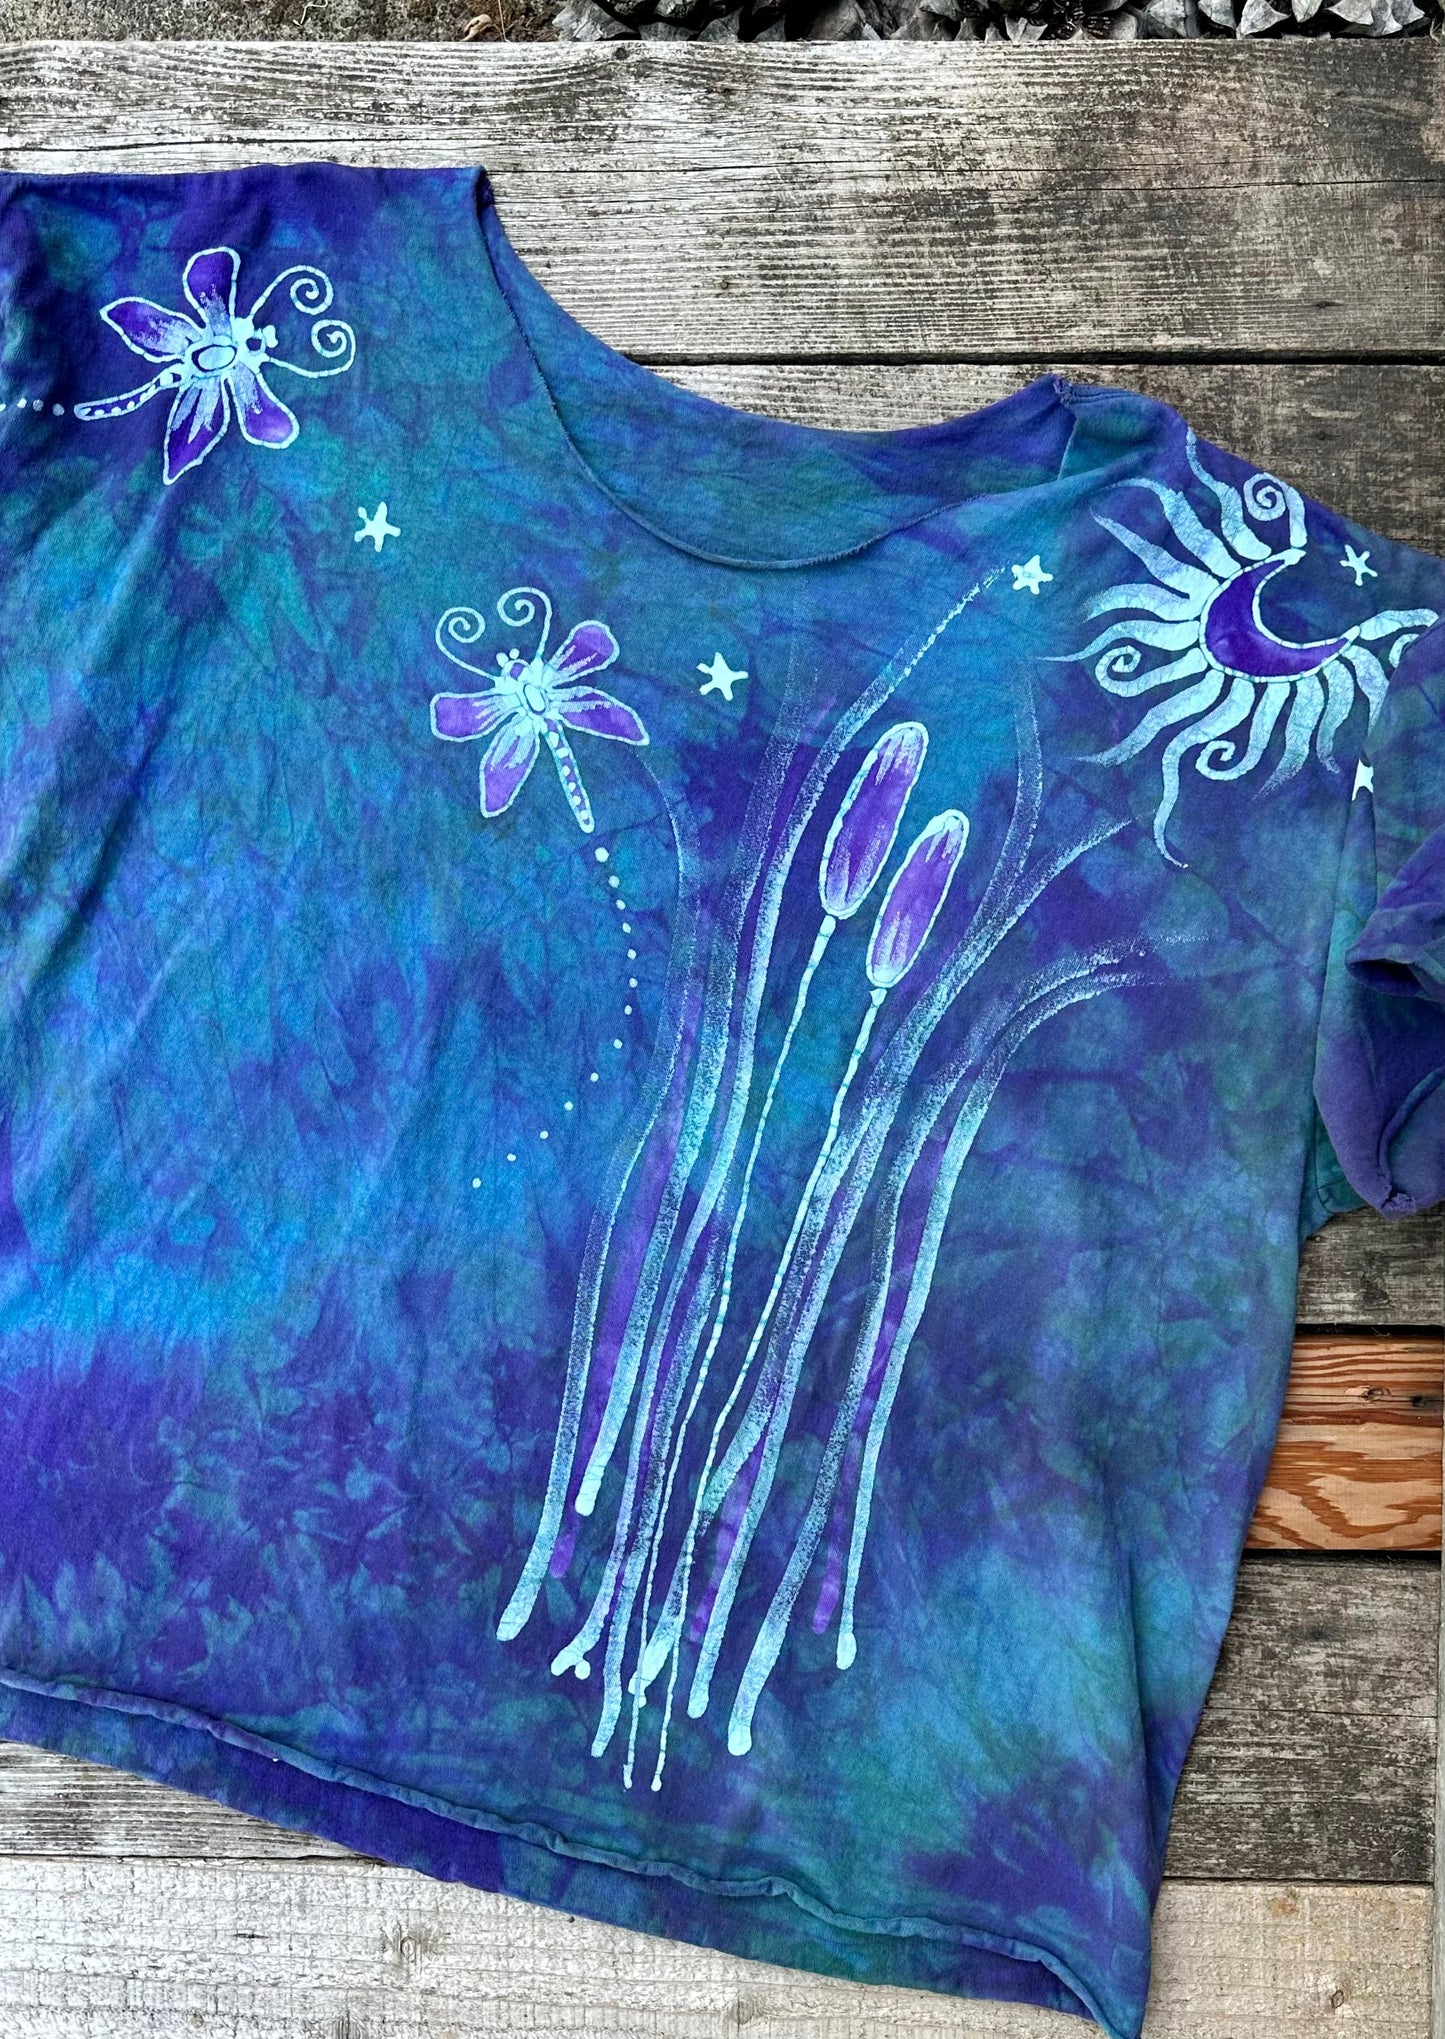 Dragonfly and Cattails Cotton Cut Cropped Tee - Plus Sizes 2X and 3X Shirts & Tops Batikwalla by Victoria 